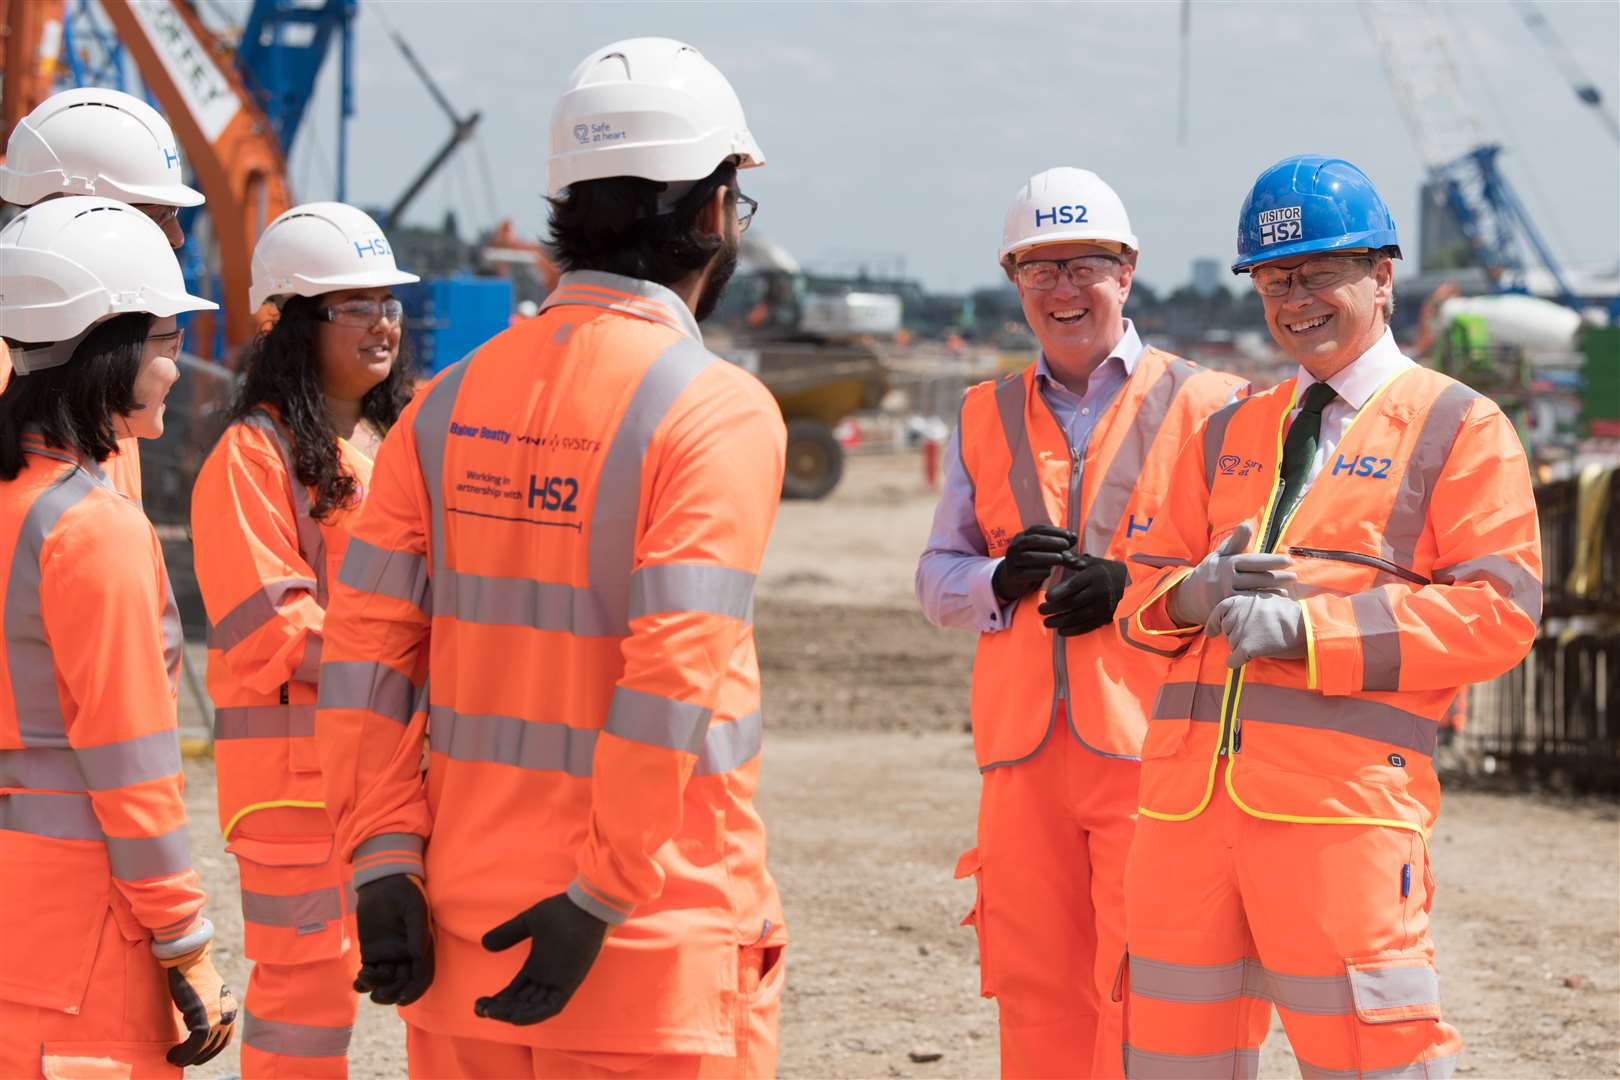 Transport Secretary Grant Shapps (far right) chats with apprentices during a visit to the HS2 ‘superhub’ at Oak Common station in west London in June 2021 (Stefan Rousseau/PA)